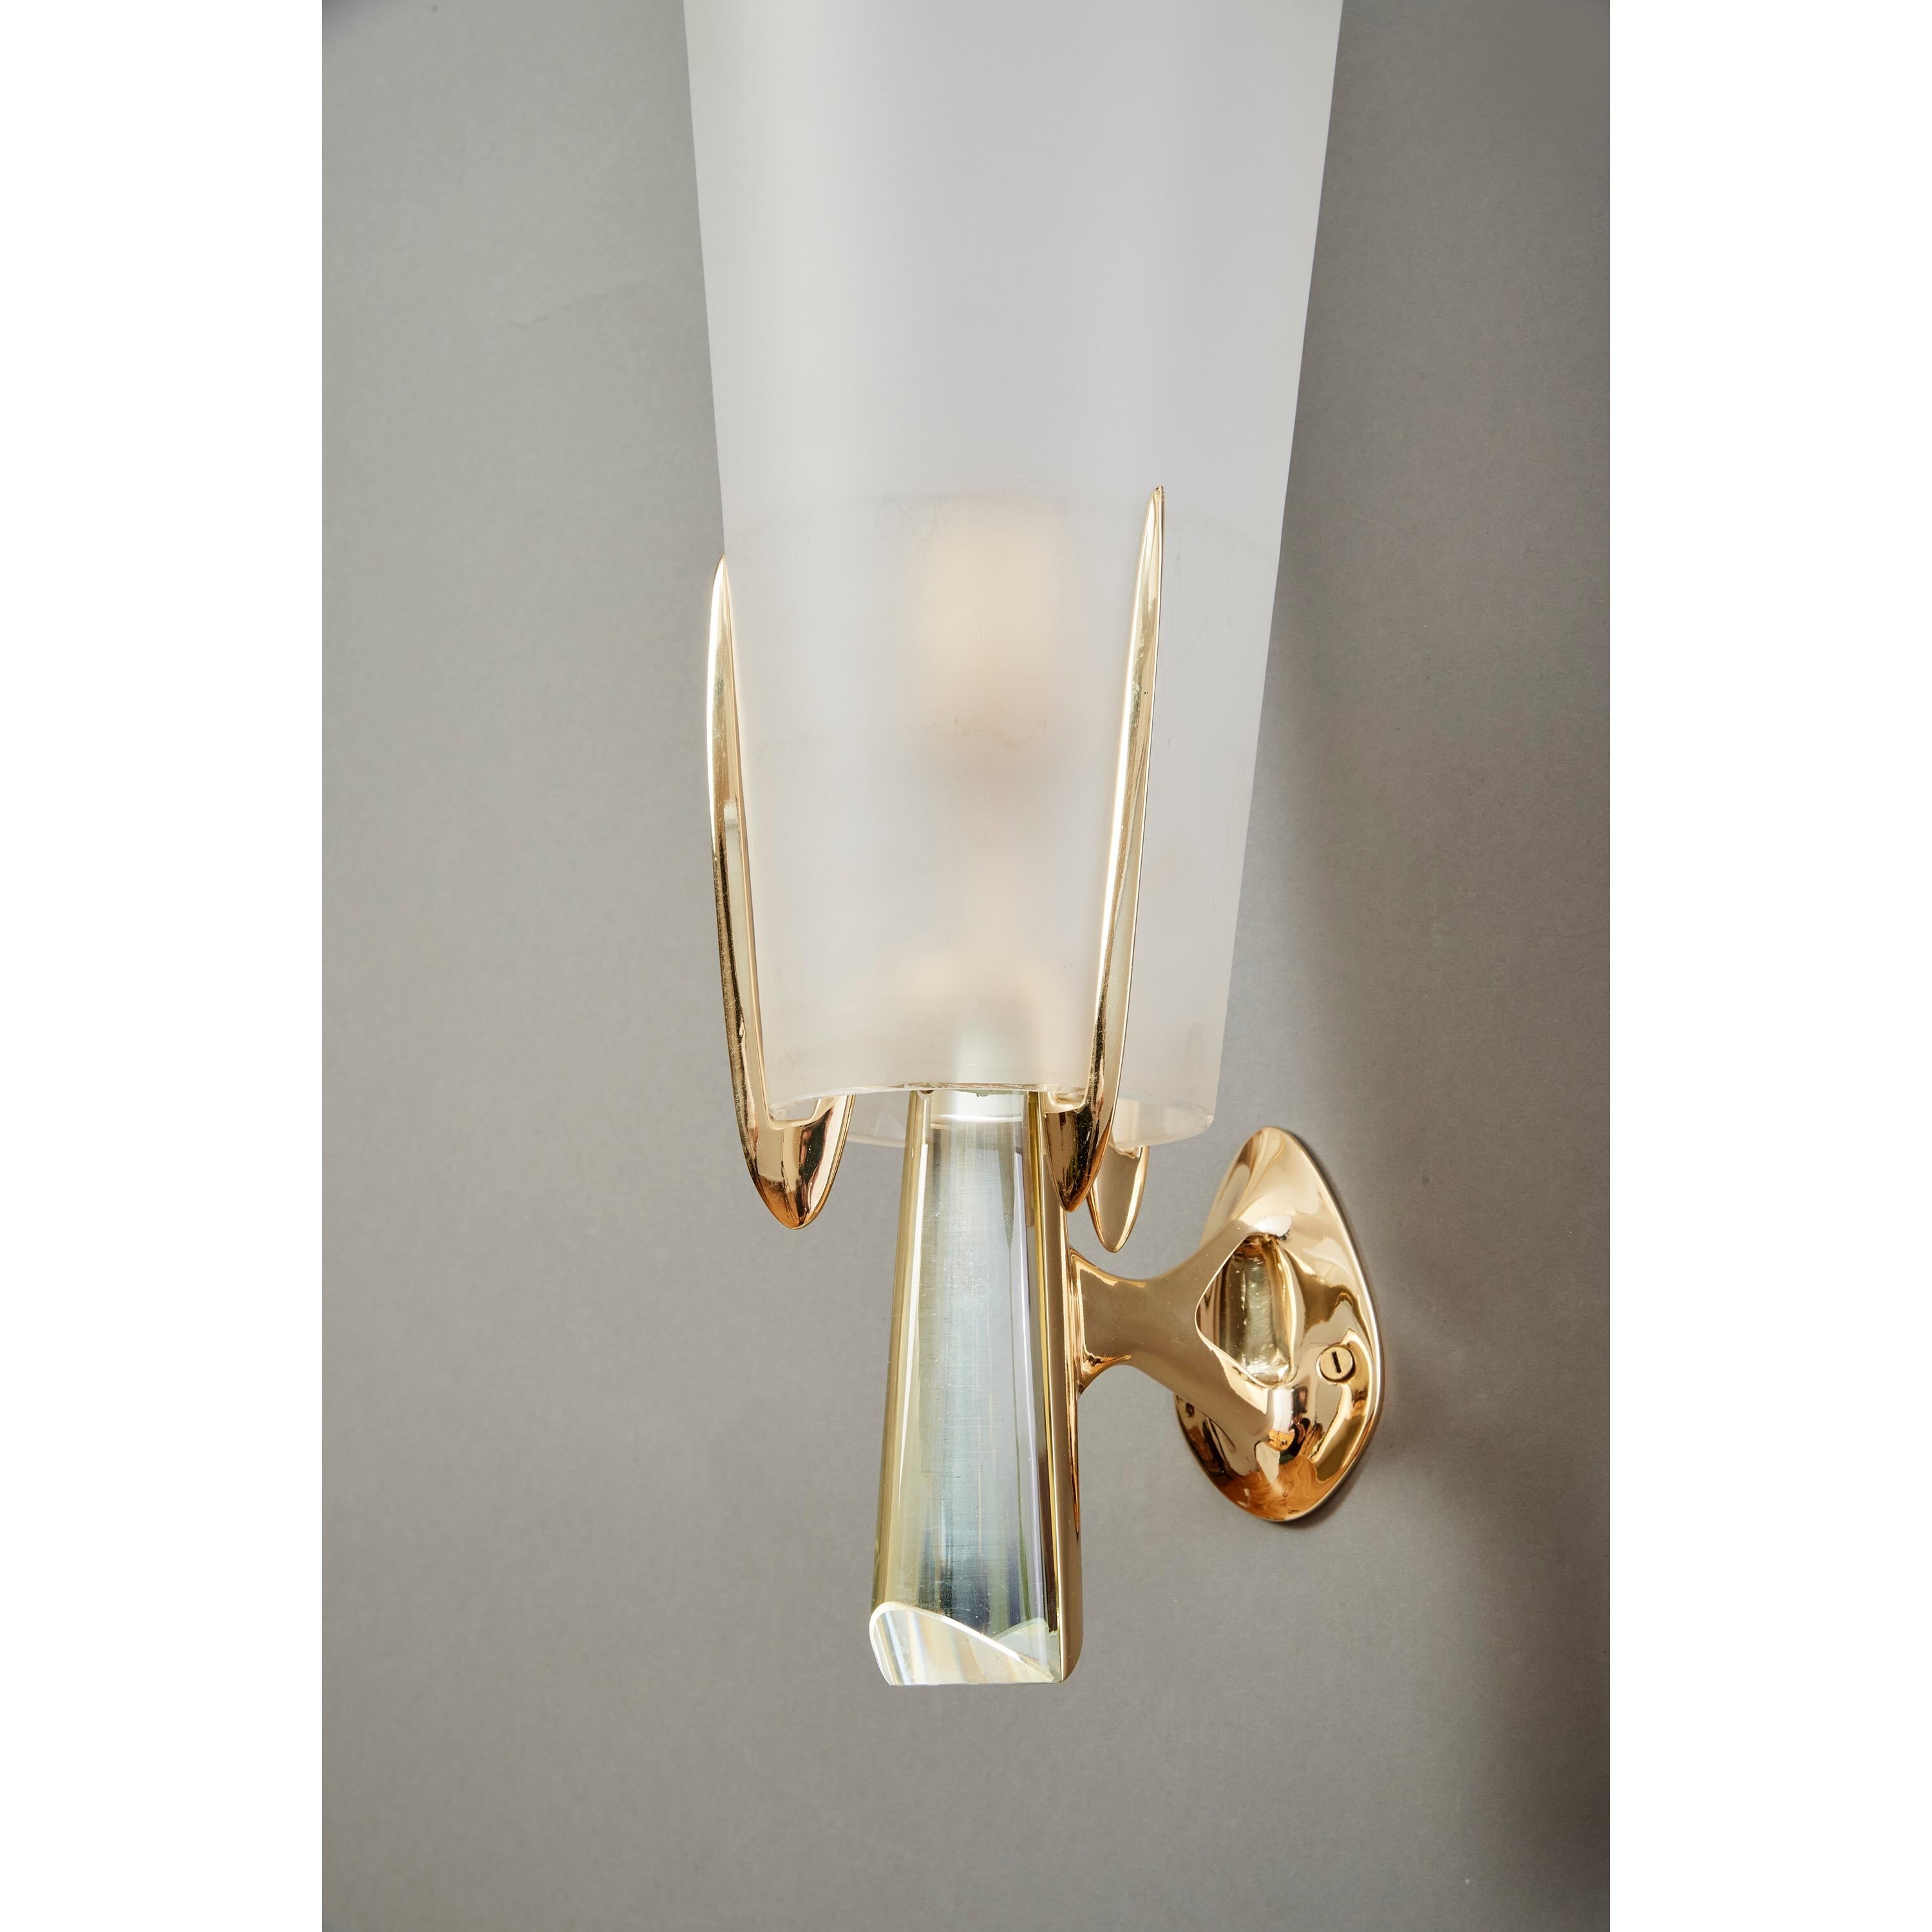 Max Ingrand for Fontana Arte: Rare Sconces in Brass and Crystal, Italy 1955 For Sale 6